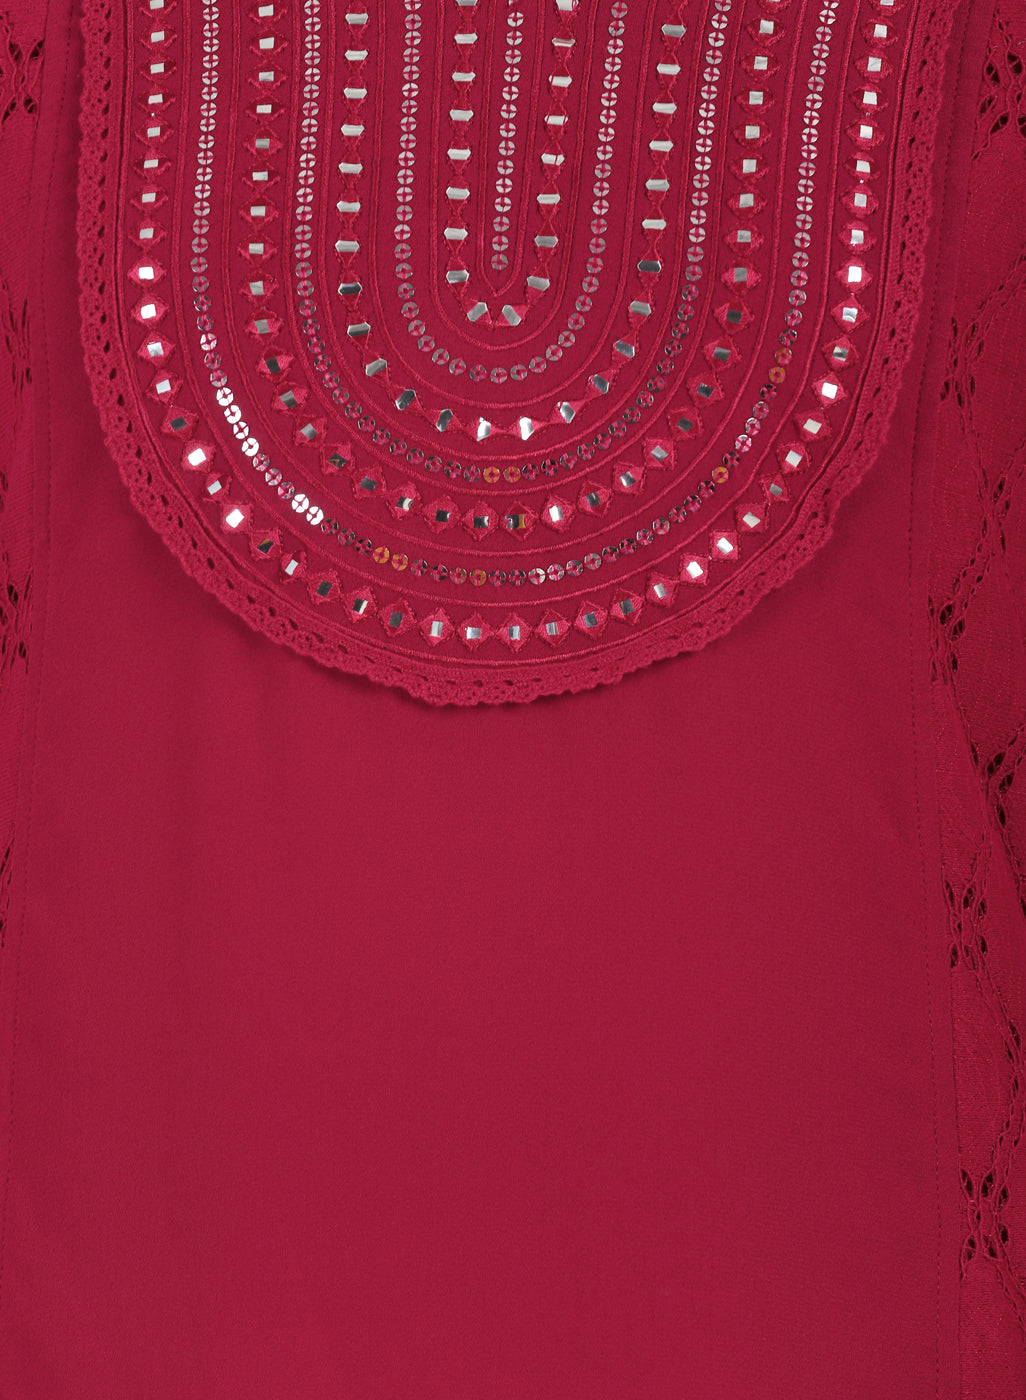 Rose Short Tunic with Mirror Work and Bell Sleeves